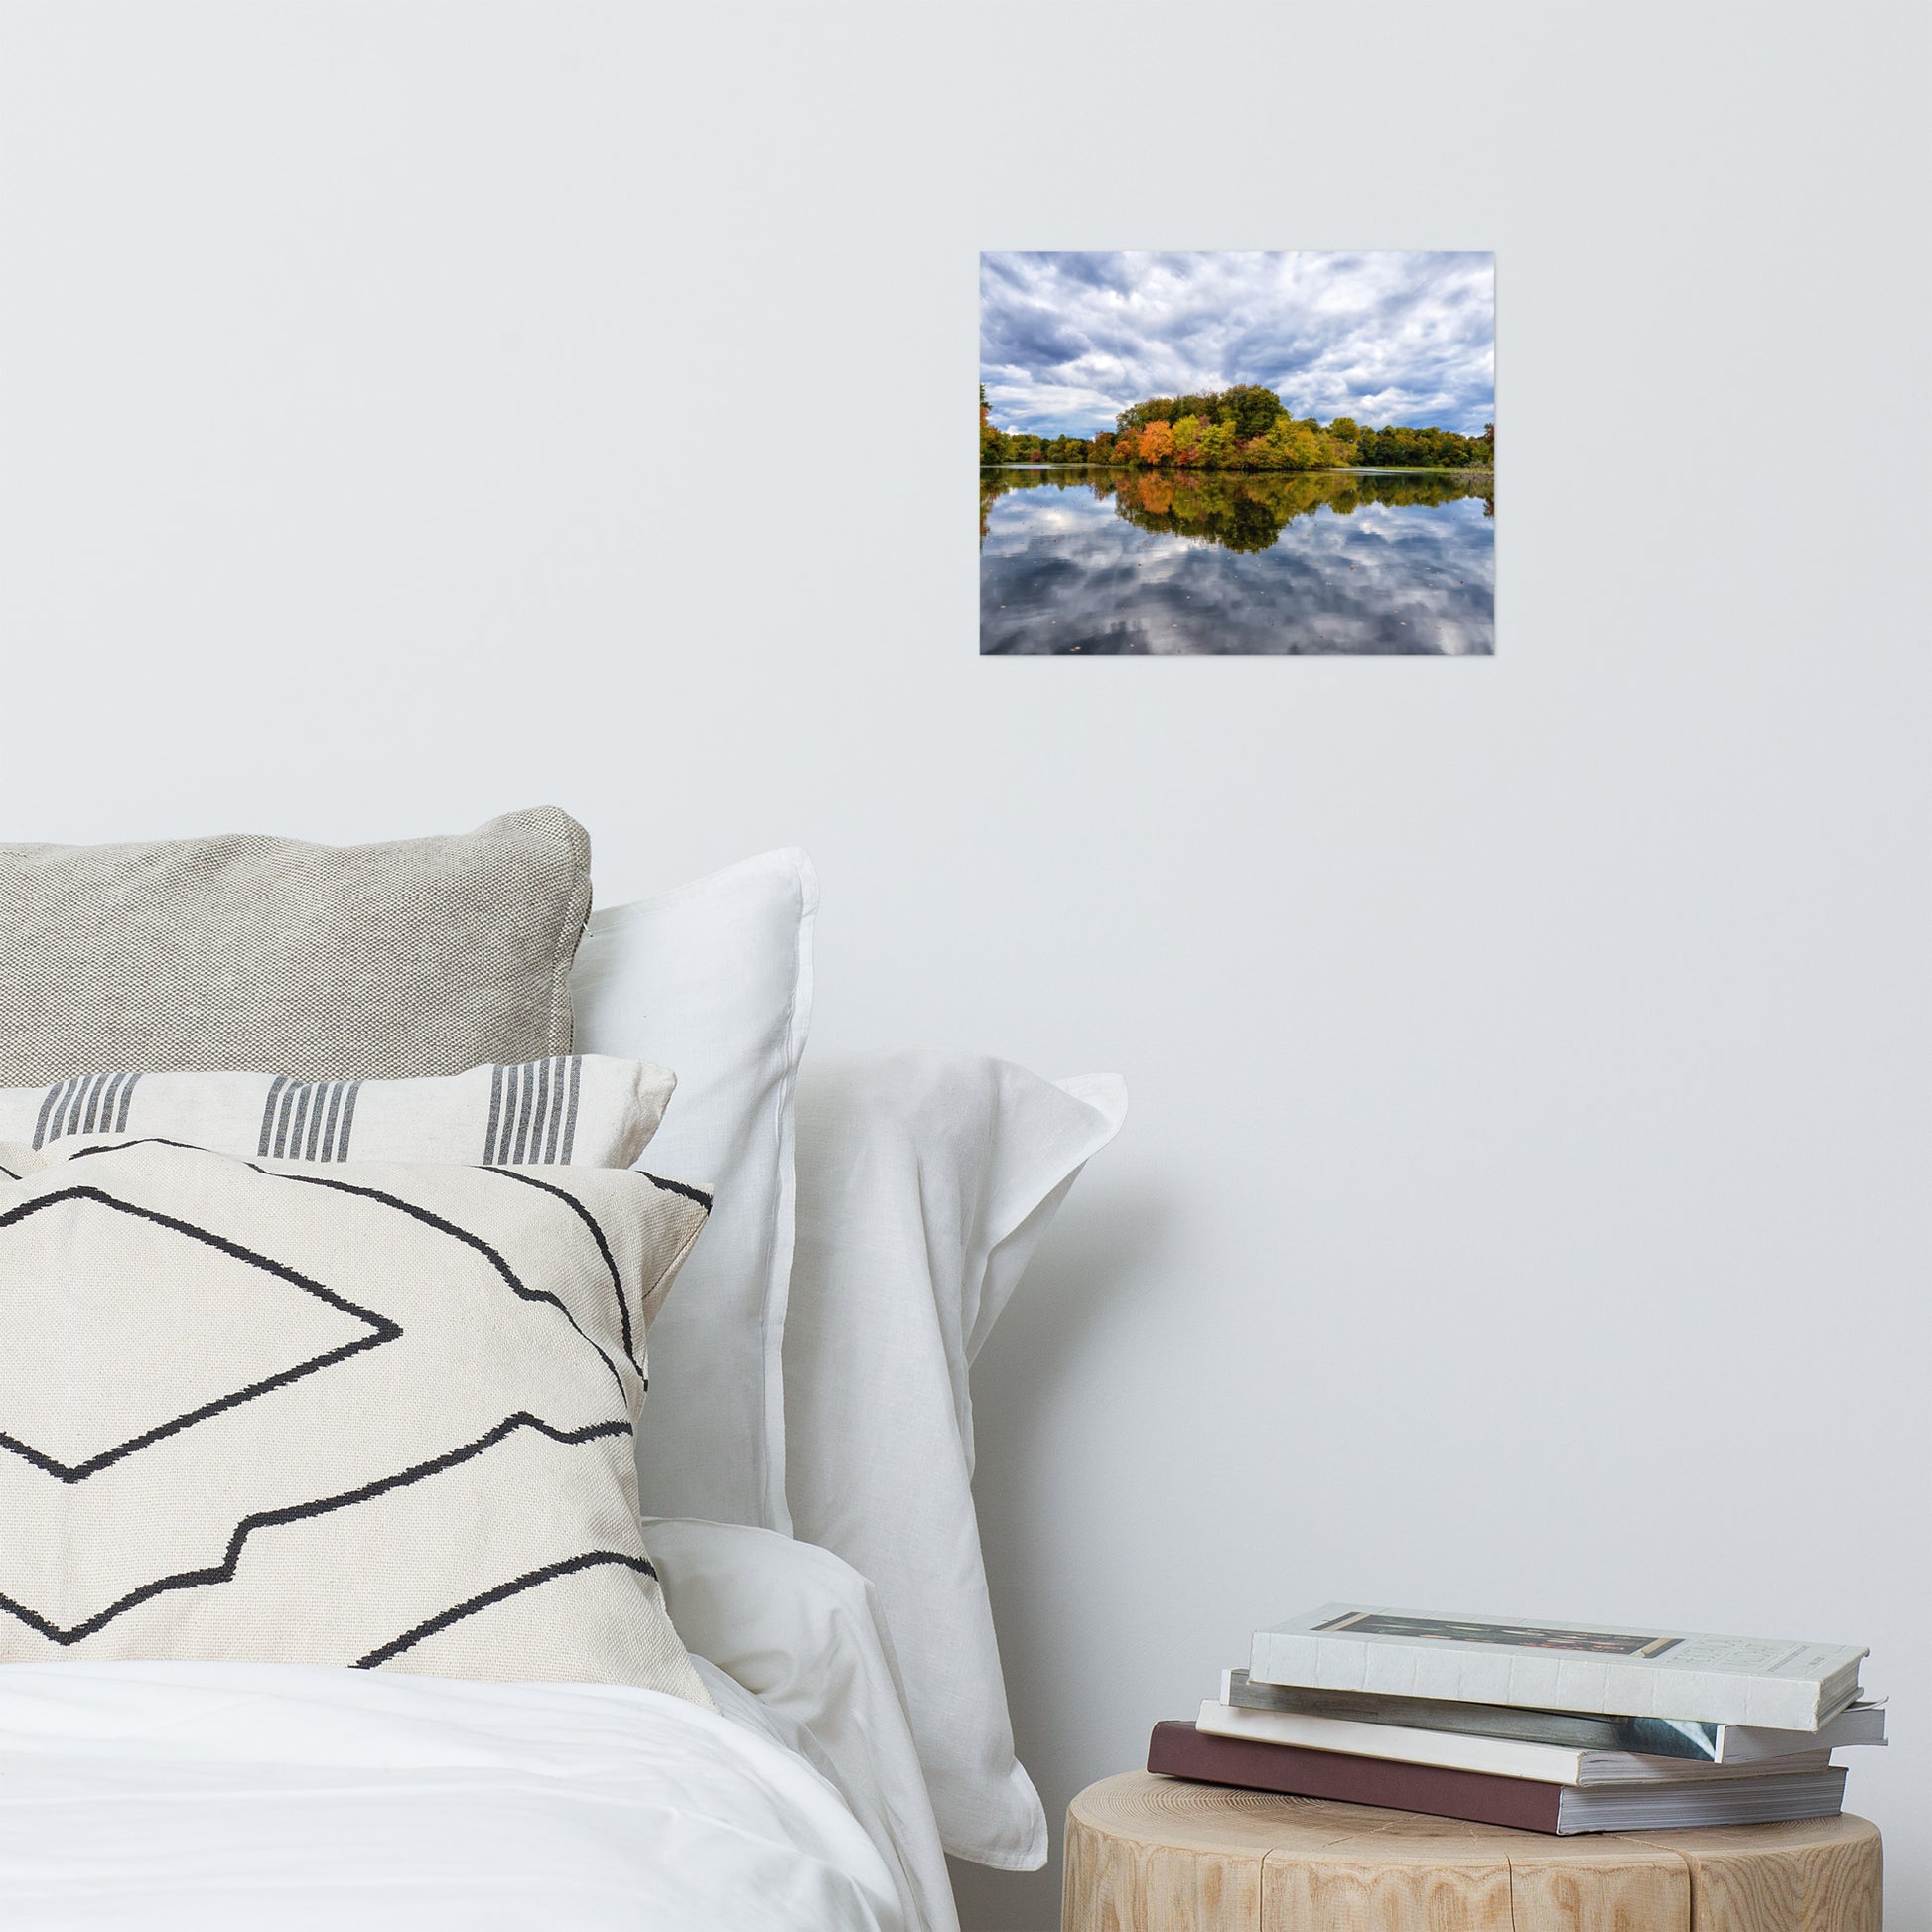 Simple Wall Art For Bedroom: Fall Trees on Edge of Pond With Stormy Sky - Rustic / Rural / Country Style Landscape / Nature Loose / Unframed / Frameless / Frameable Photograph Wall Art Print - Artwork